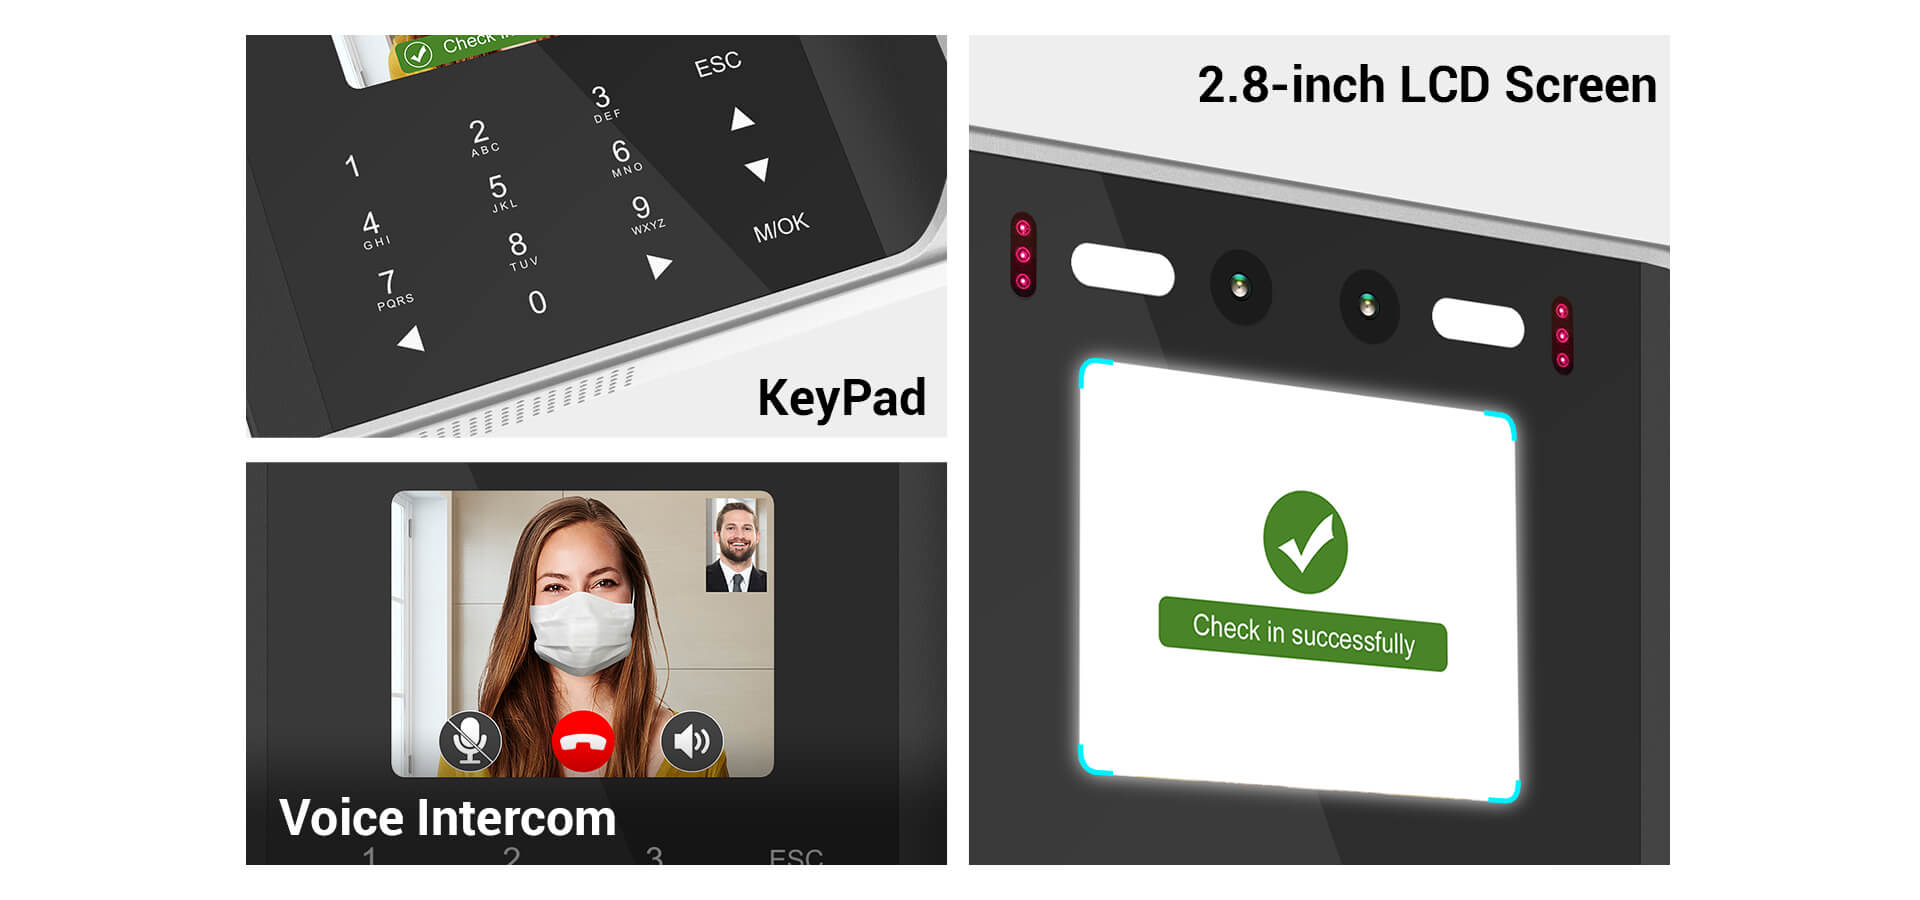 Video Intercom Attendance and Access control machine with keypad